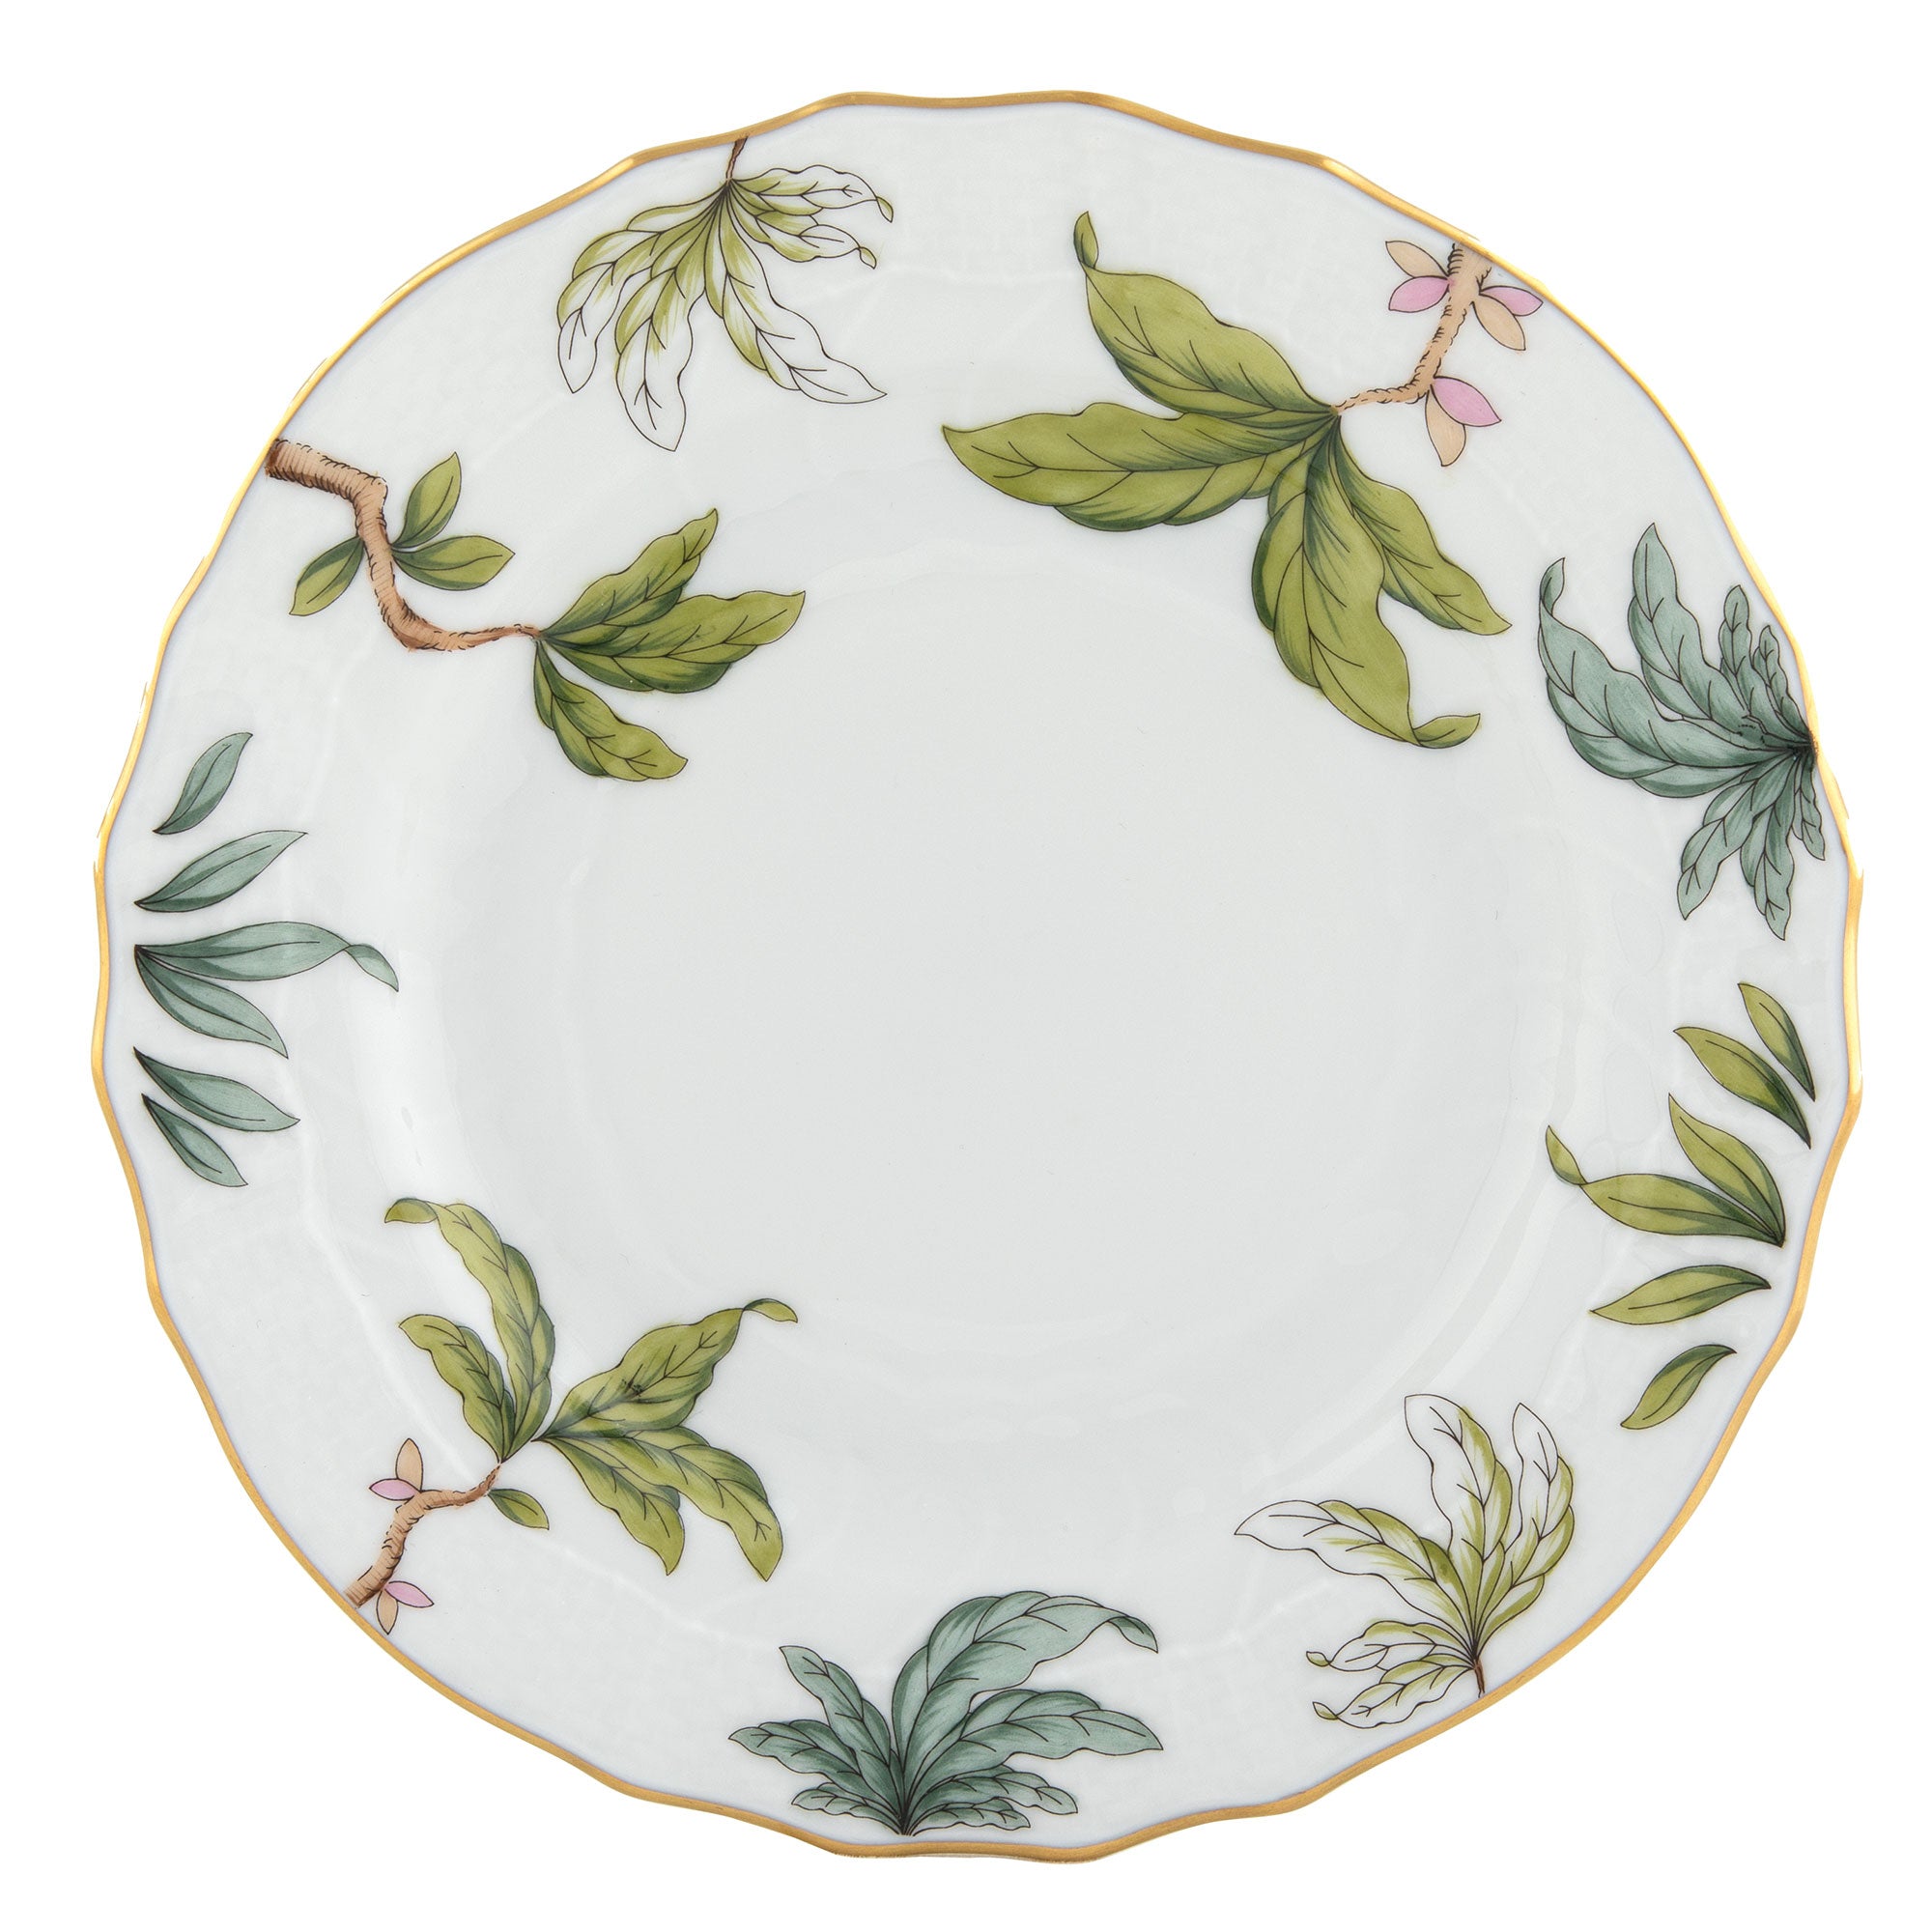 Foret Garland Bread & Butter Plate